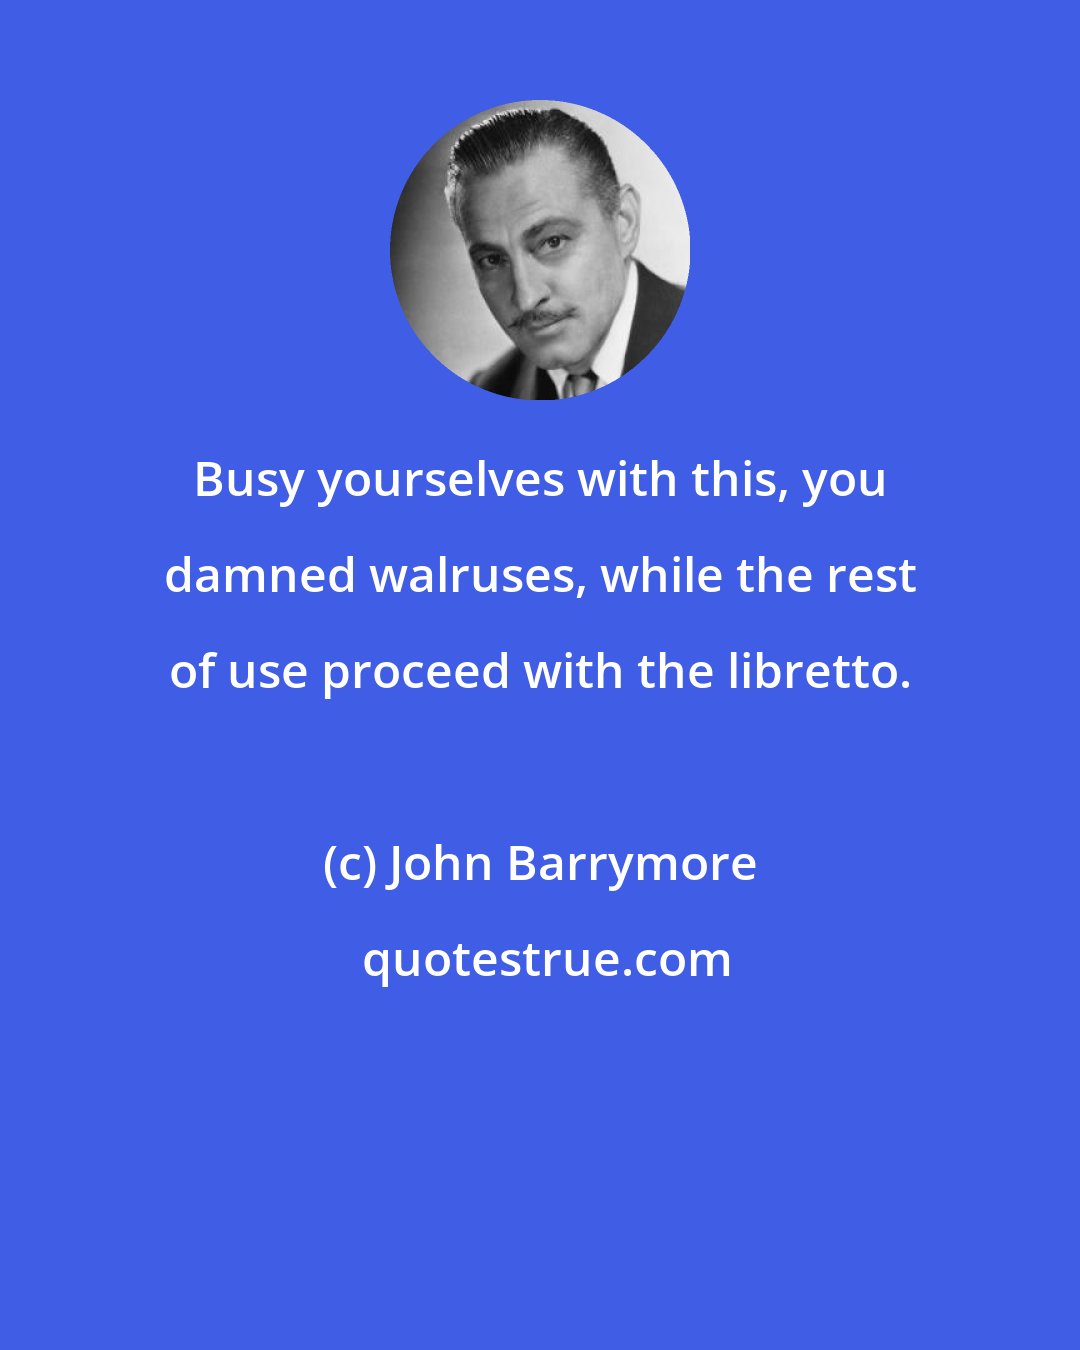 John Barrymore: Busy yourselves with this, you damned walruses, while the rest of use proceed with the libretto.